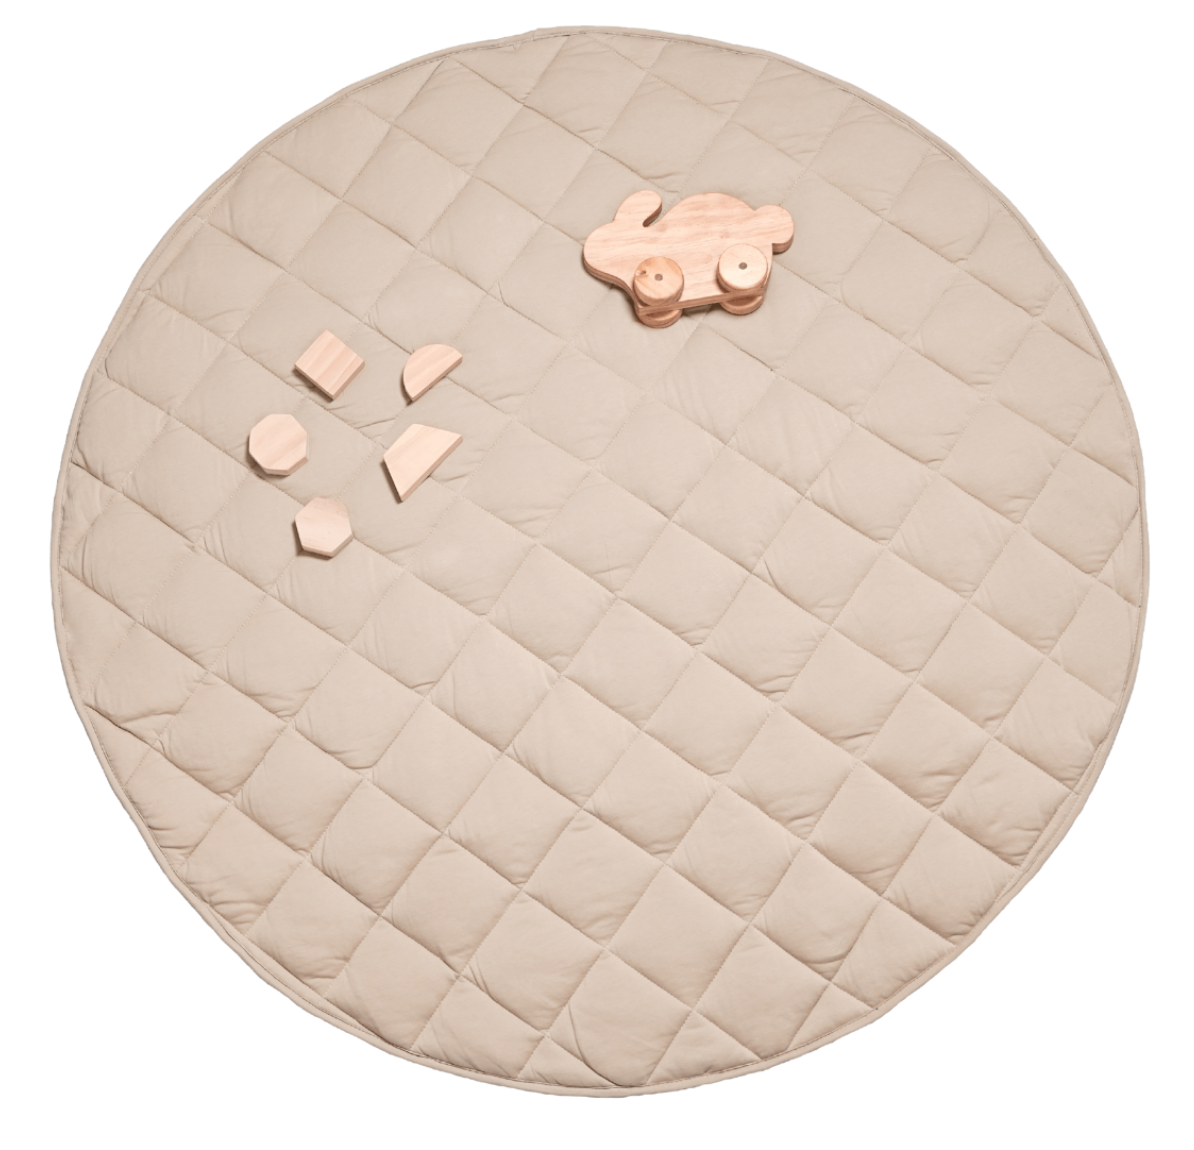 JERSEY QUILTED PLAY MAT (WATERPROOF BACKING) - WHEAT